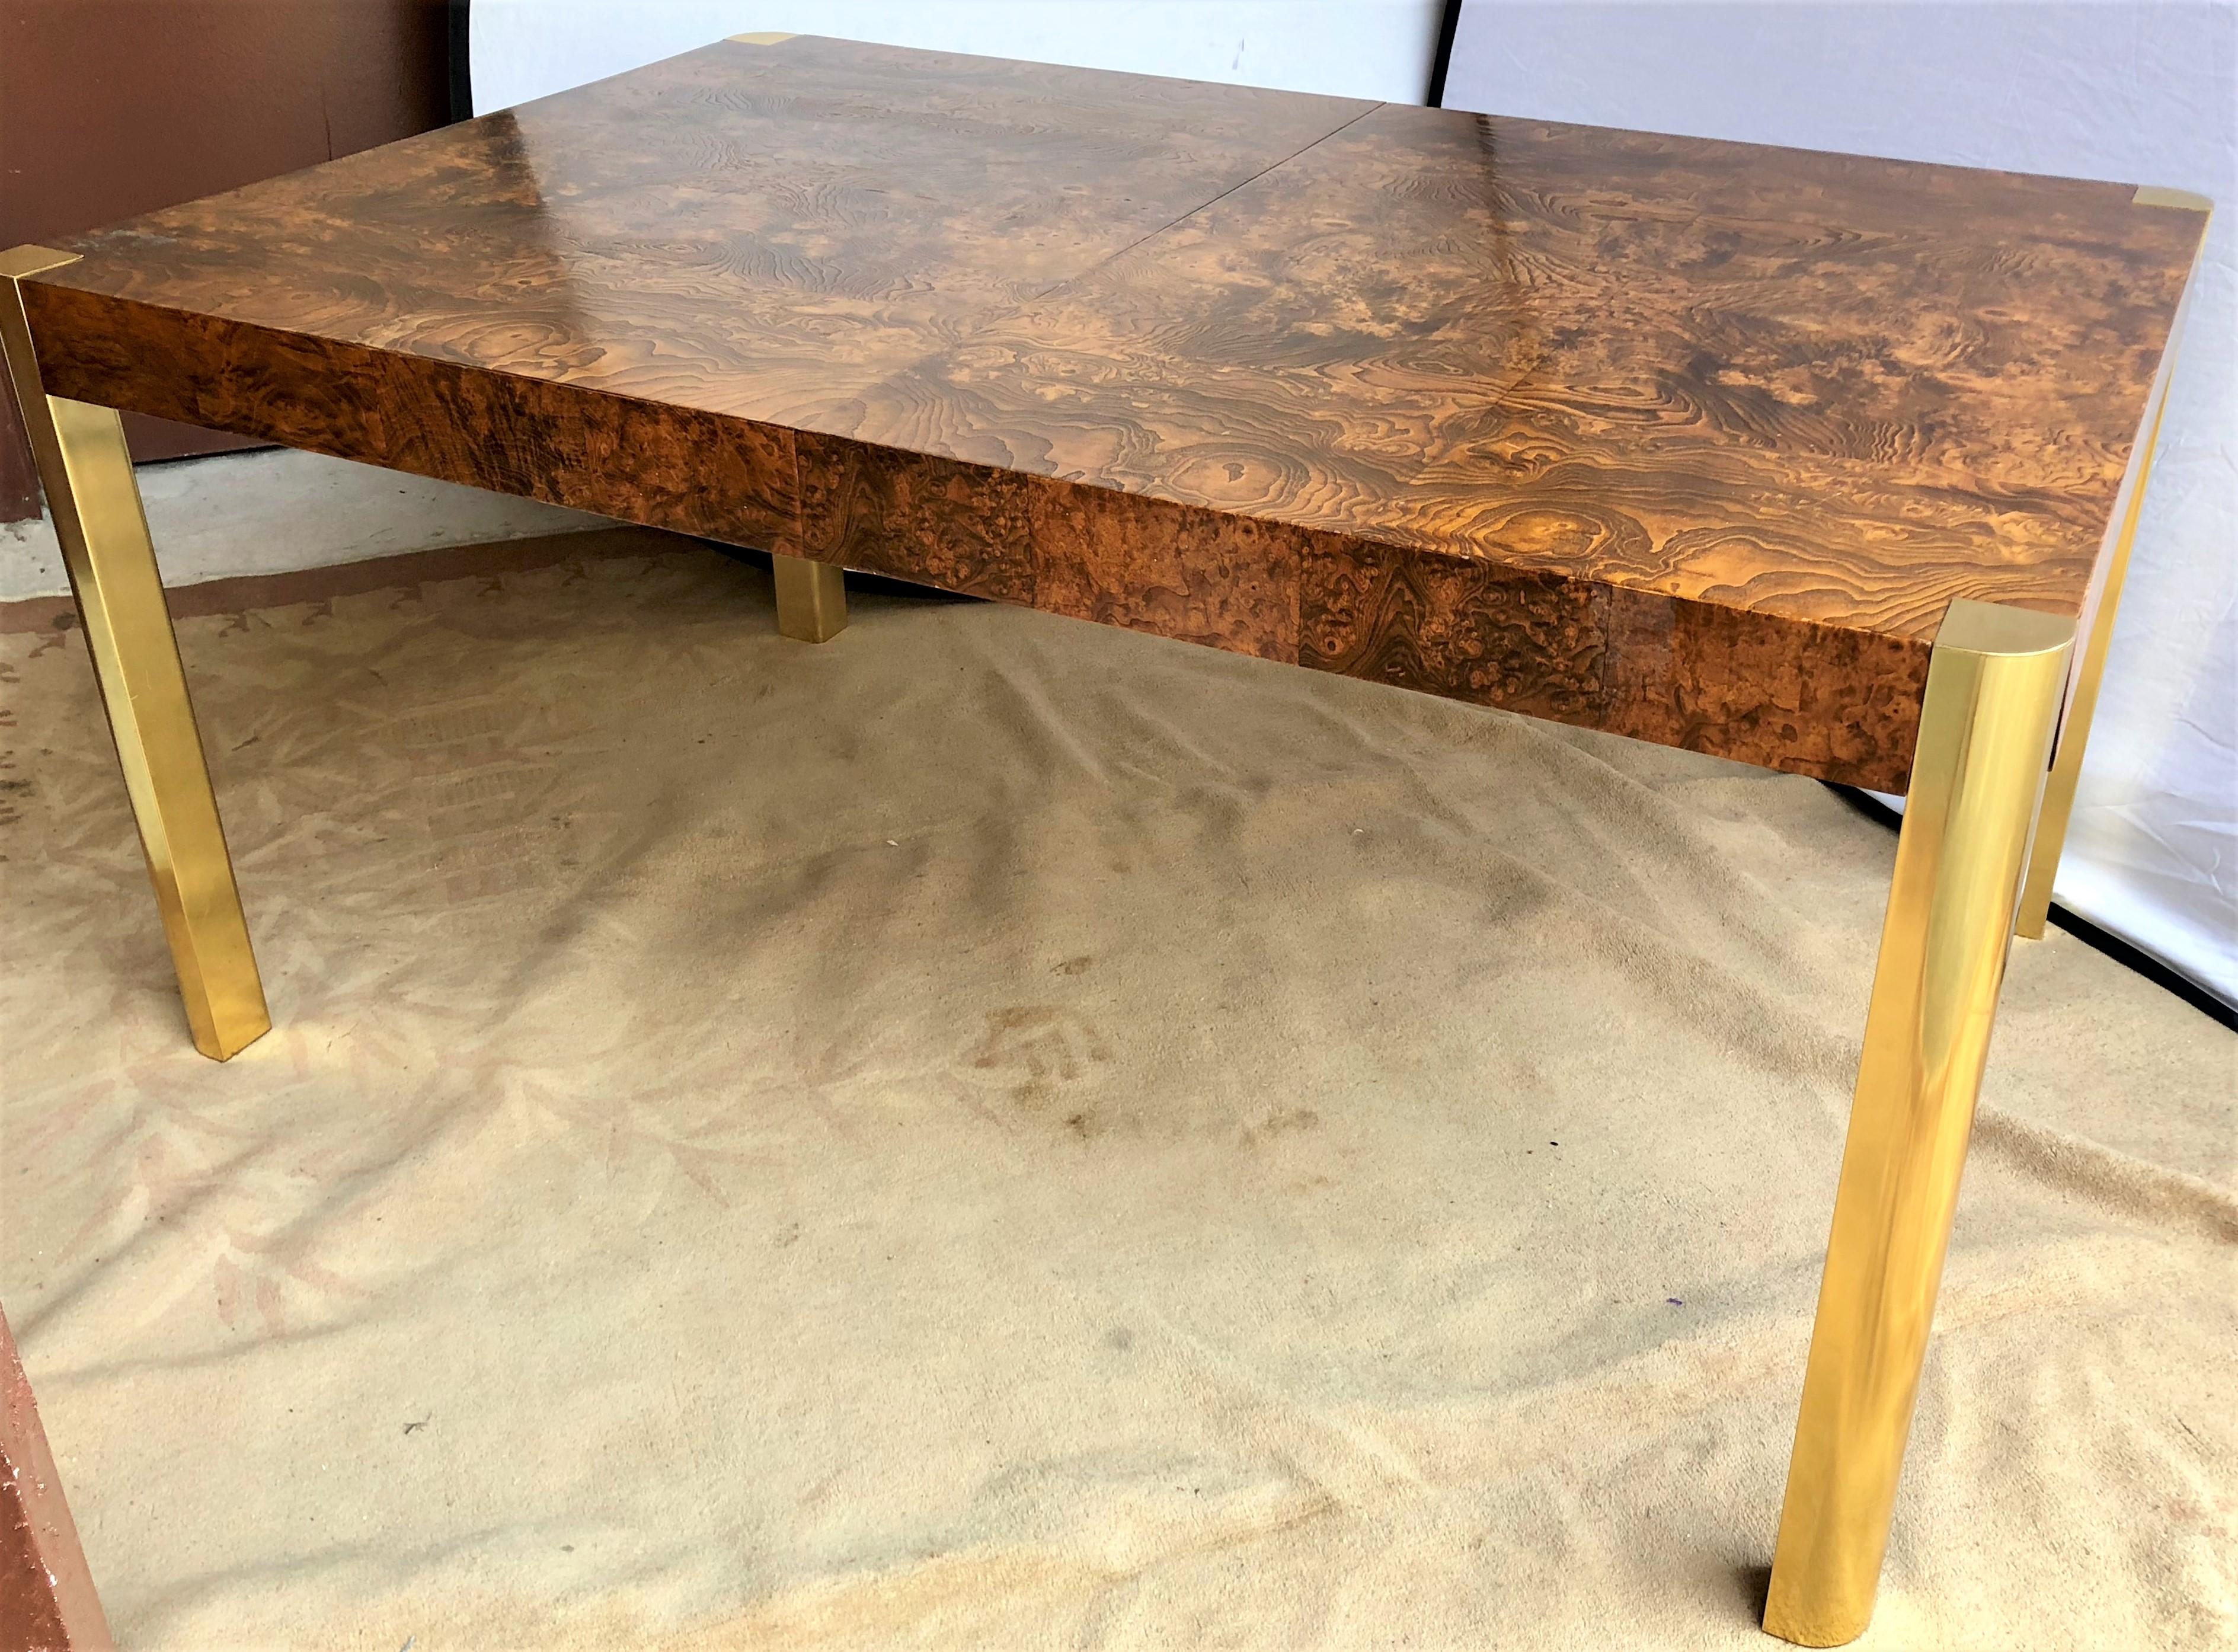 Mid-Century Modern burled wood modernist brass column leg M ilo Baughman dining table with two leaves. Set on four demilune form brass toned column legs this sturdy and nicely designed dining table is certain to add luxury to any mid century modern